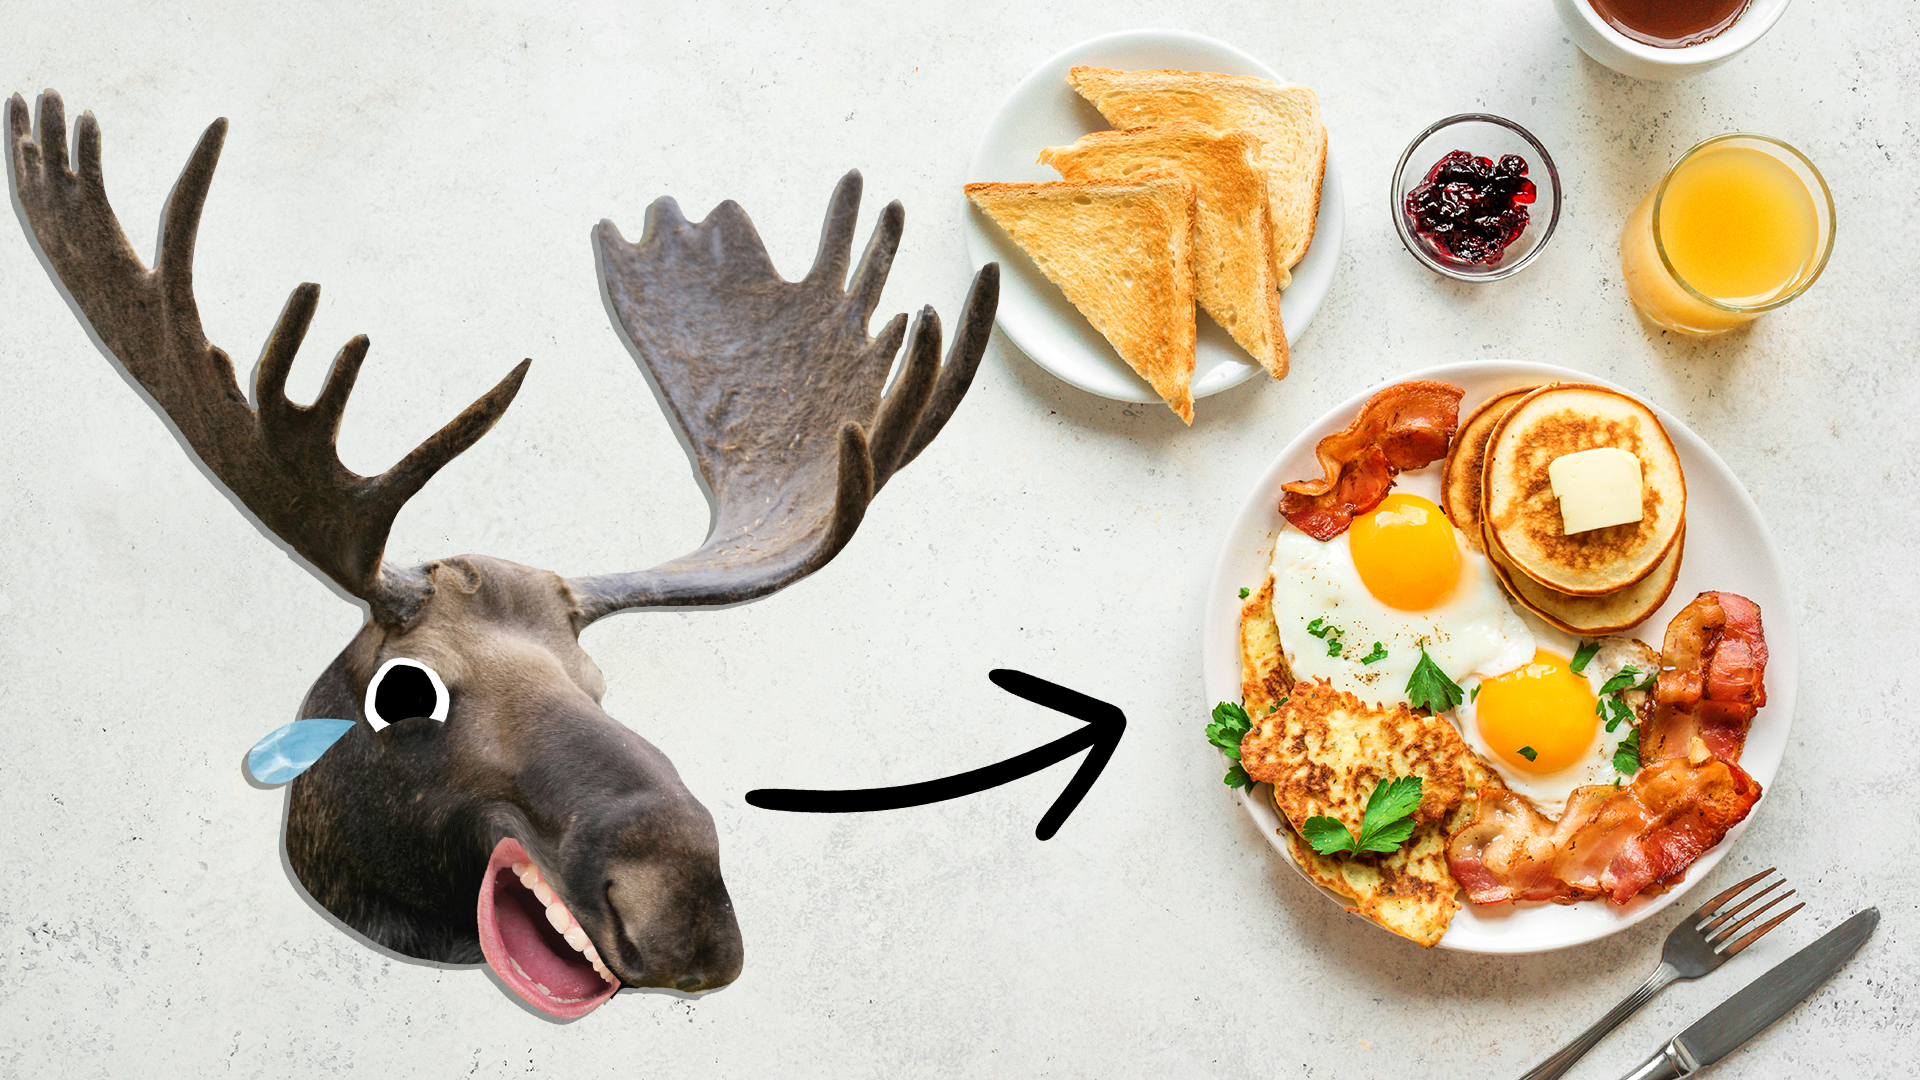 A moose with some tasty breakfast